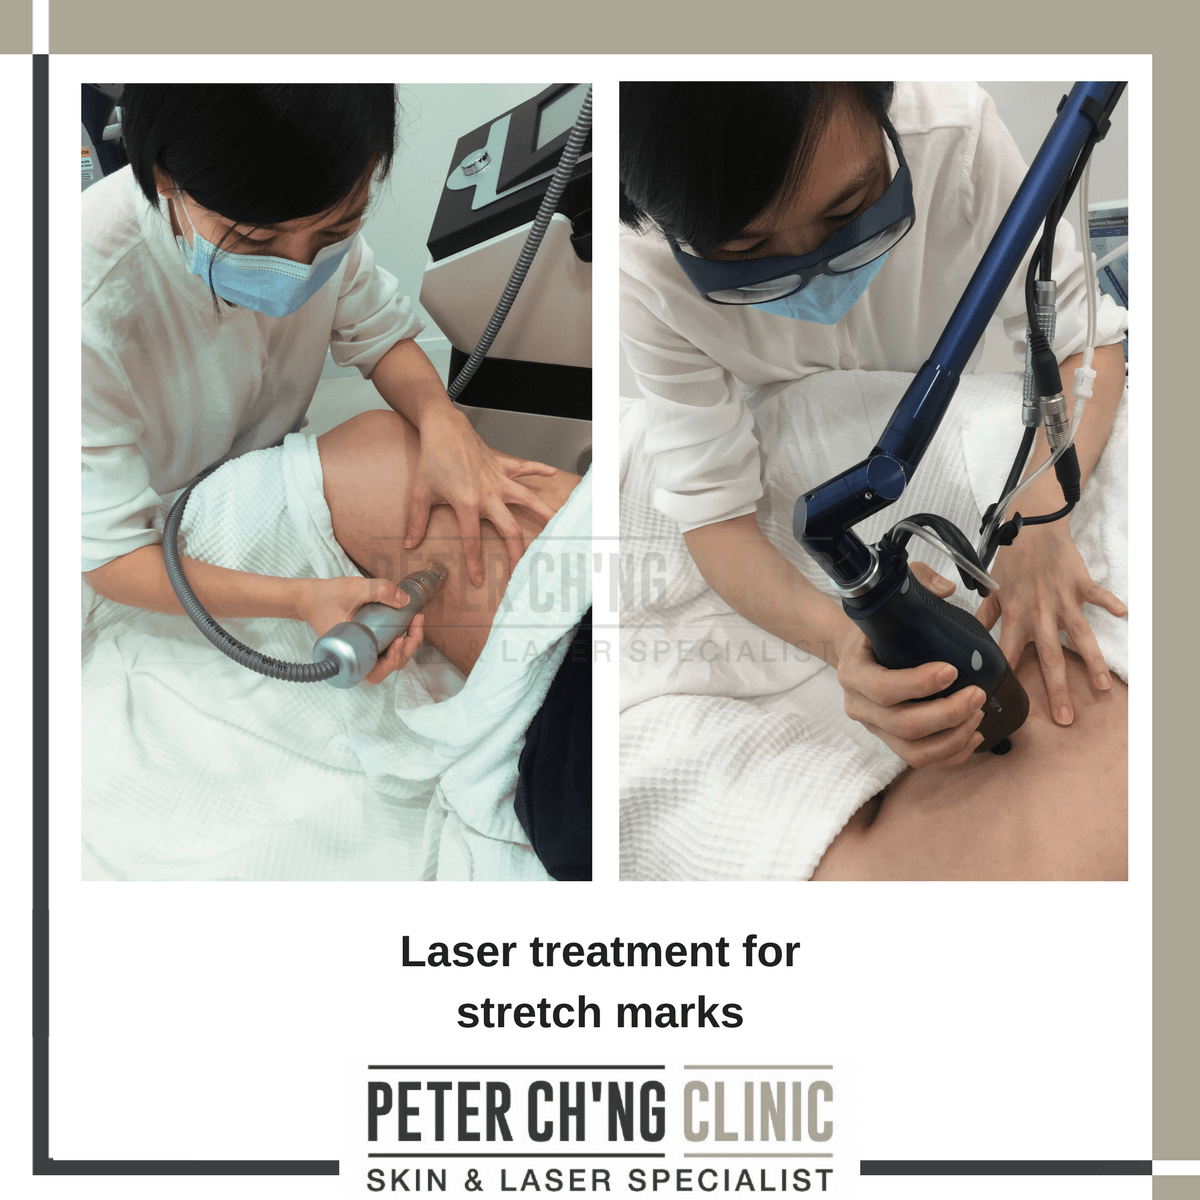 Laser treatment for stretch marks